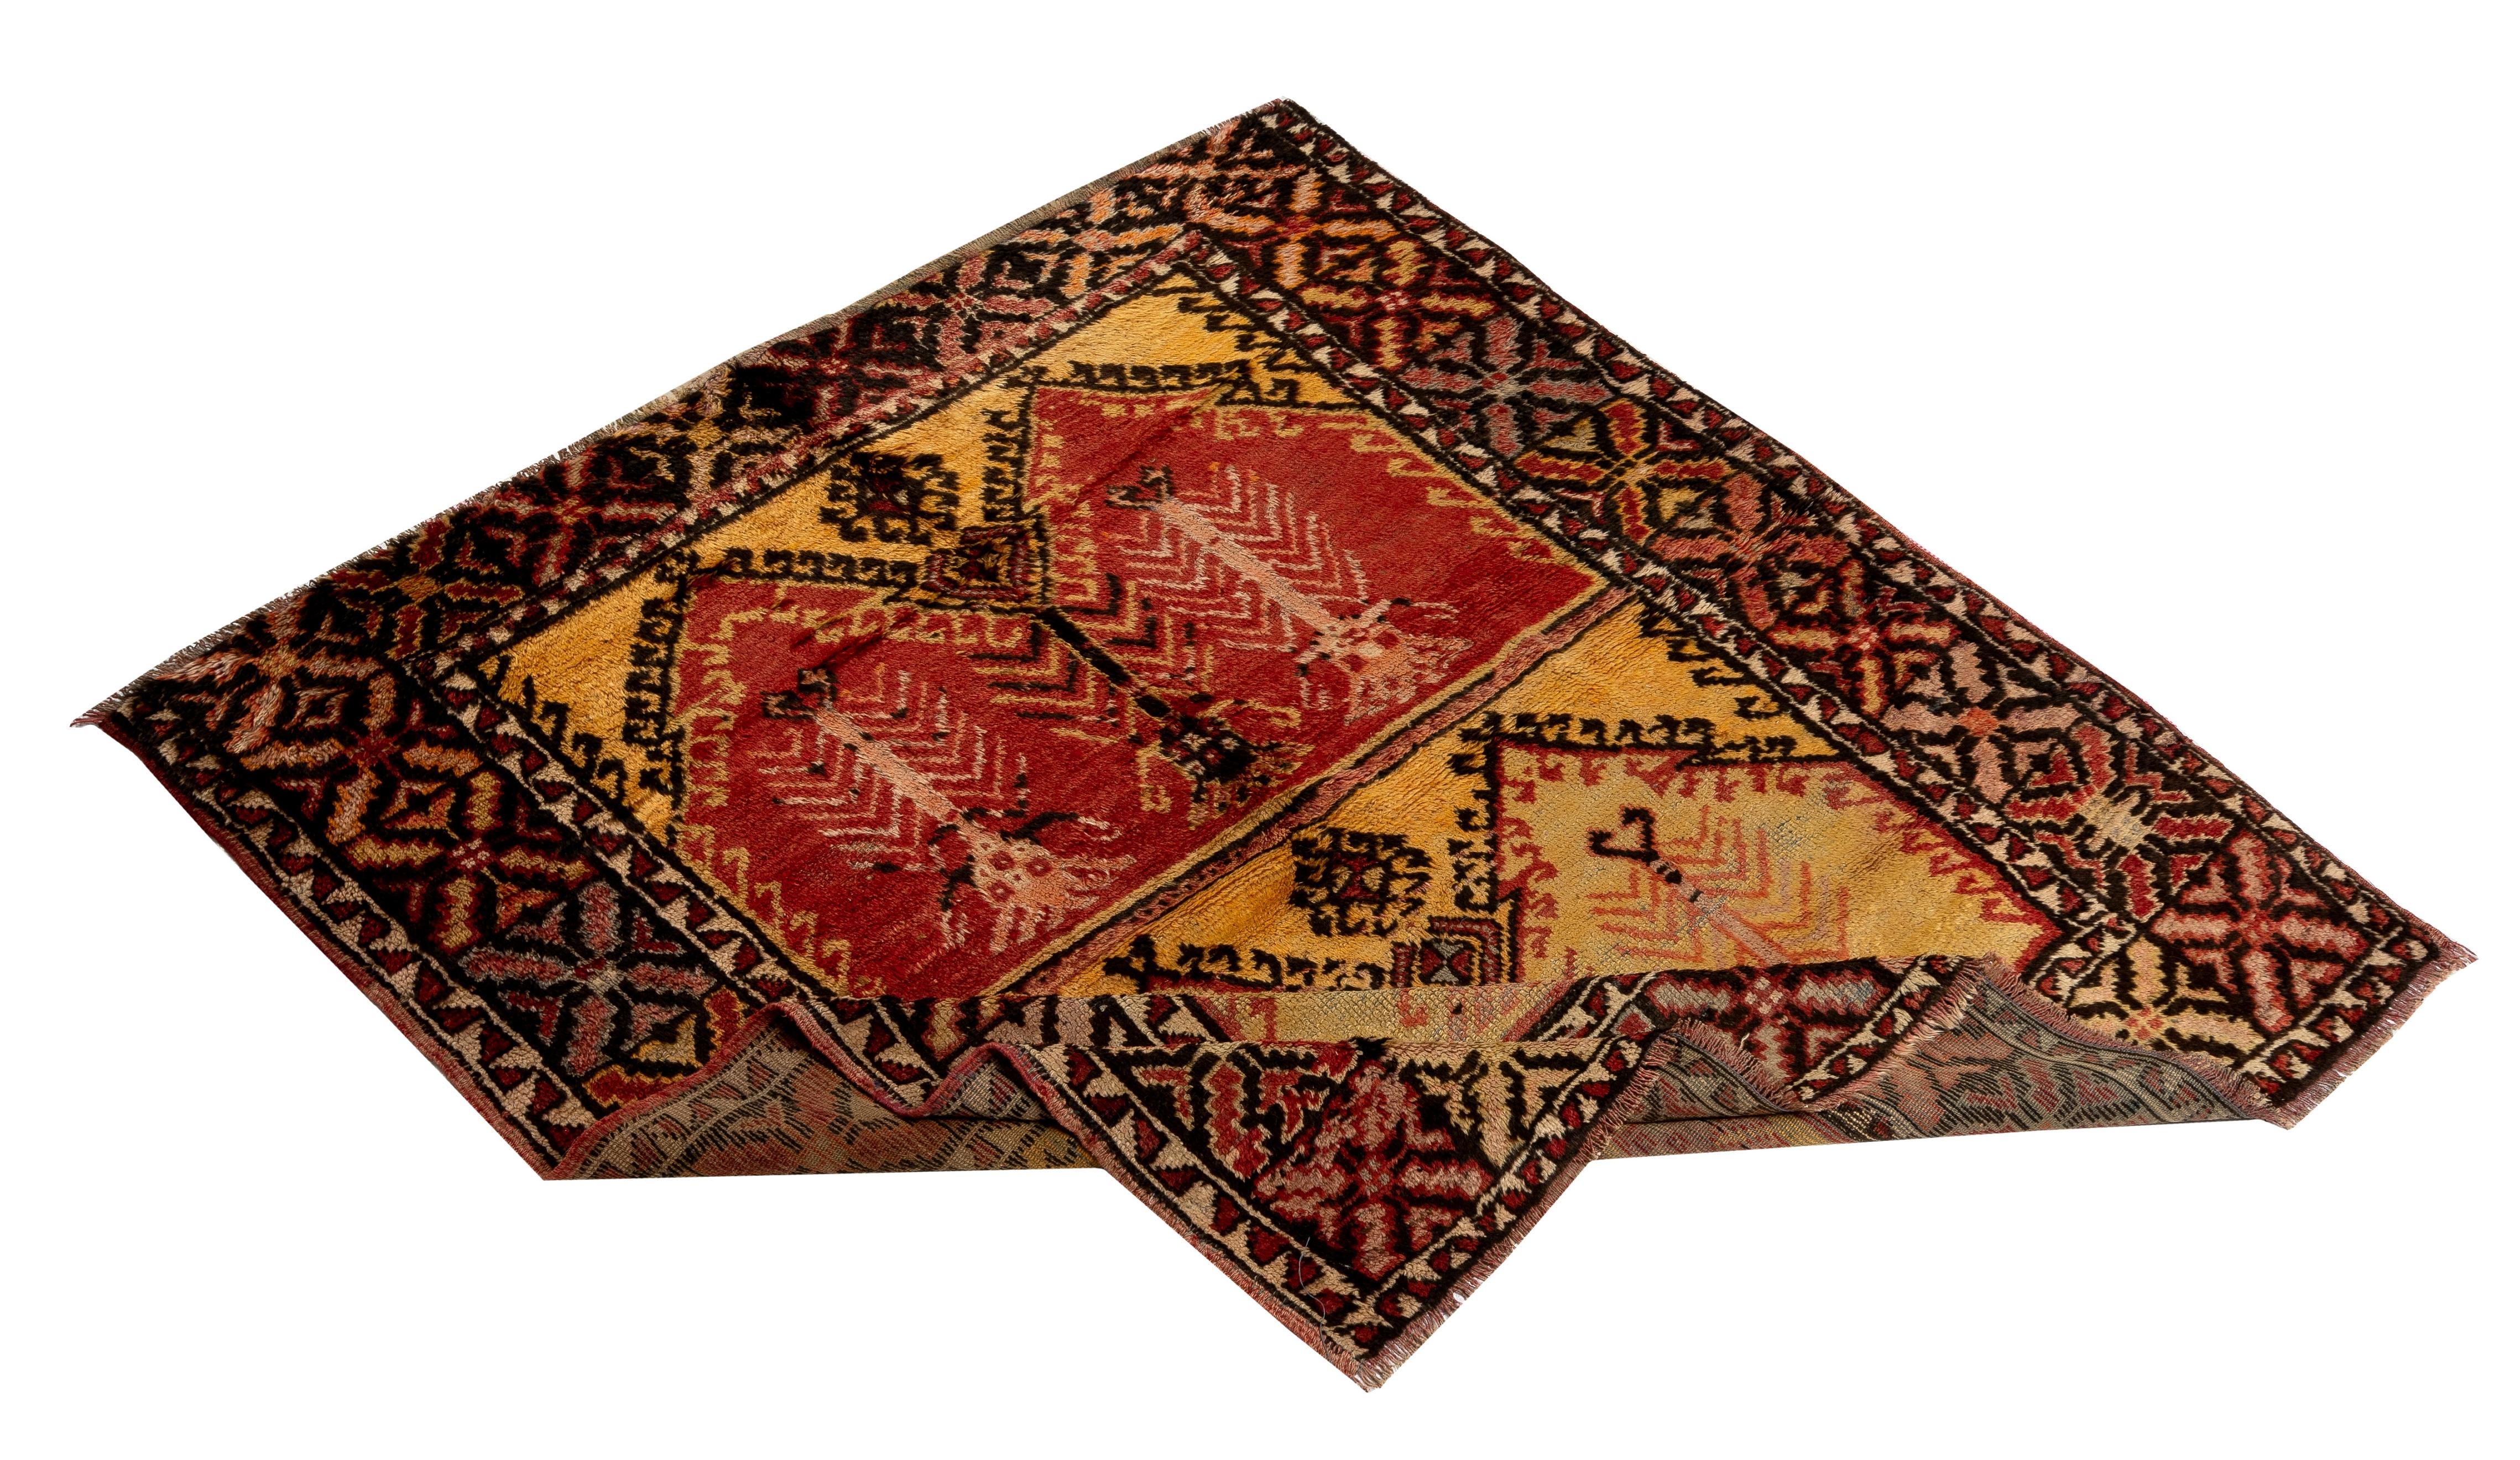 A vintage, one-of-a-kind, hand-knotted Tulu (Turkish word for thick-piled) rug from Konya in Central Anatolia, Turkey. These simple and somewhat small rugs with lustrous wool pile were made by nomads and villagers in Konya region of Central Anatolia